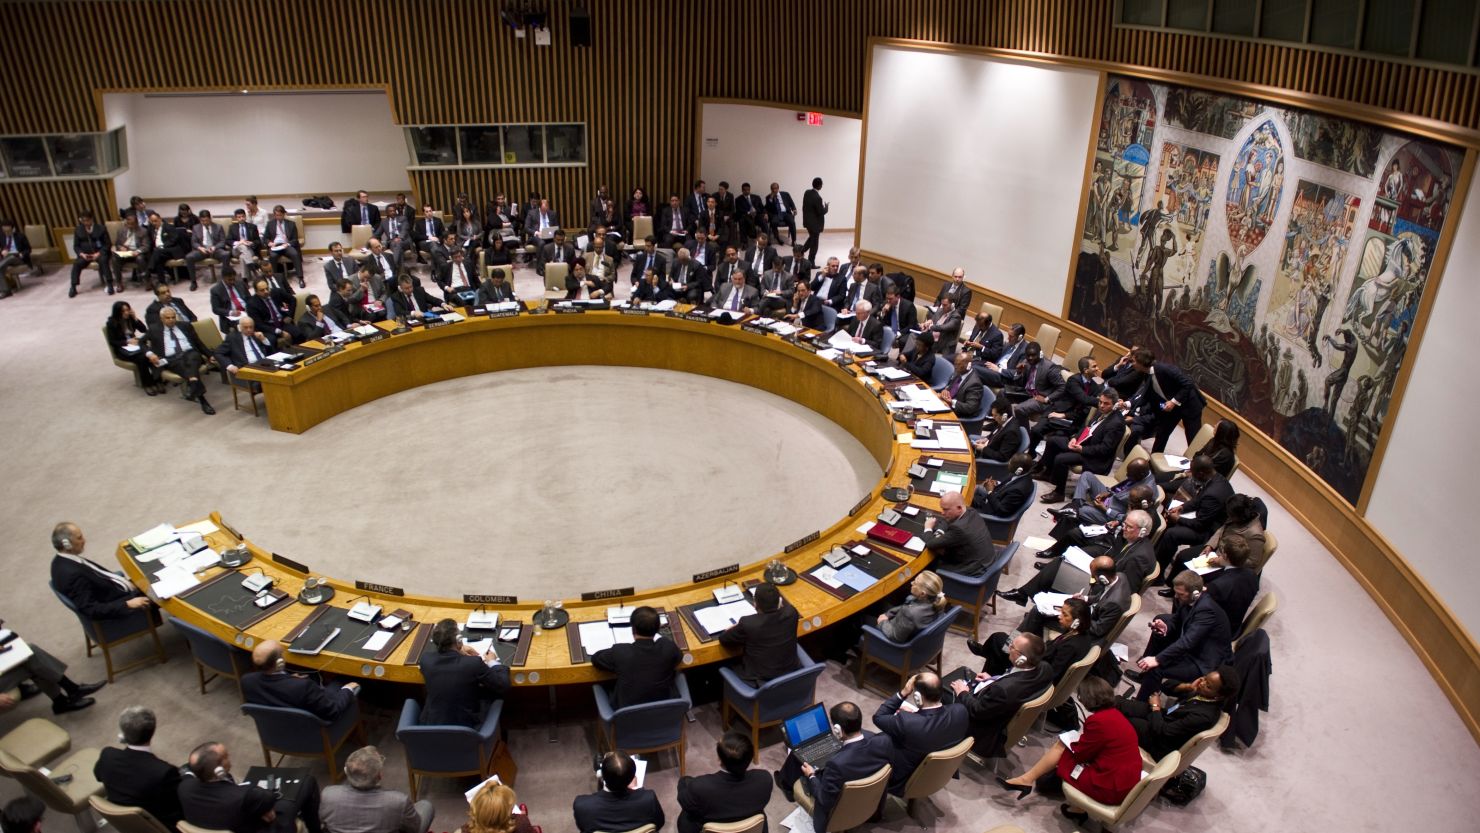 The U.N. Security Council meets Tuesday to consider a resolution to stop the violence in Syria.